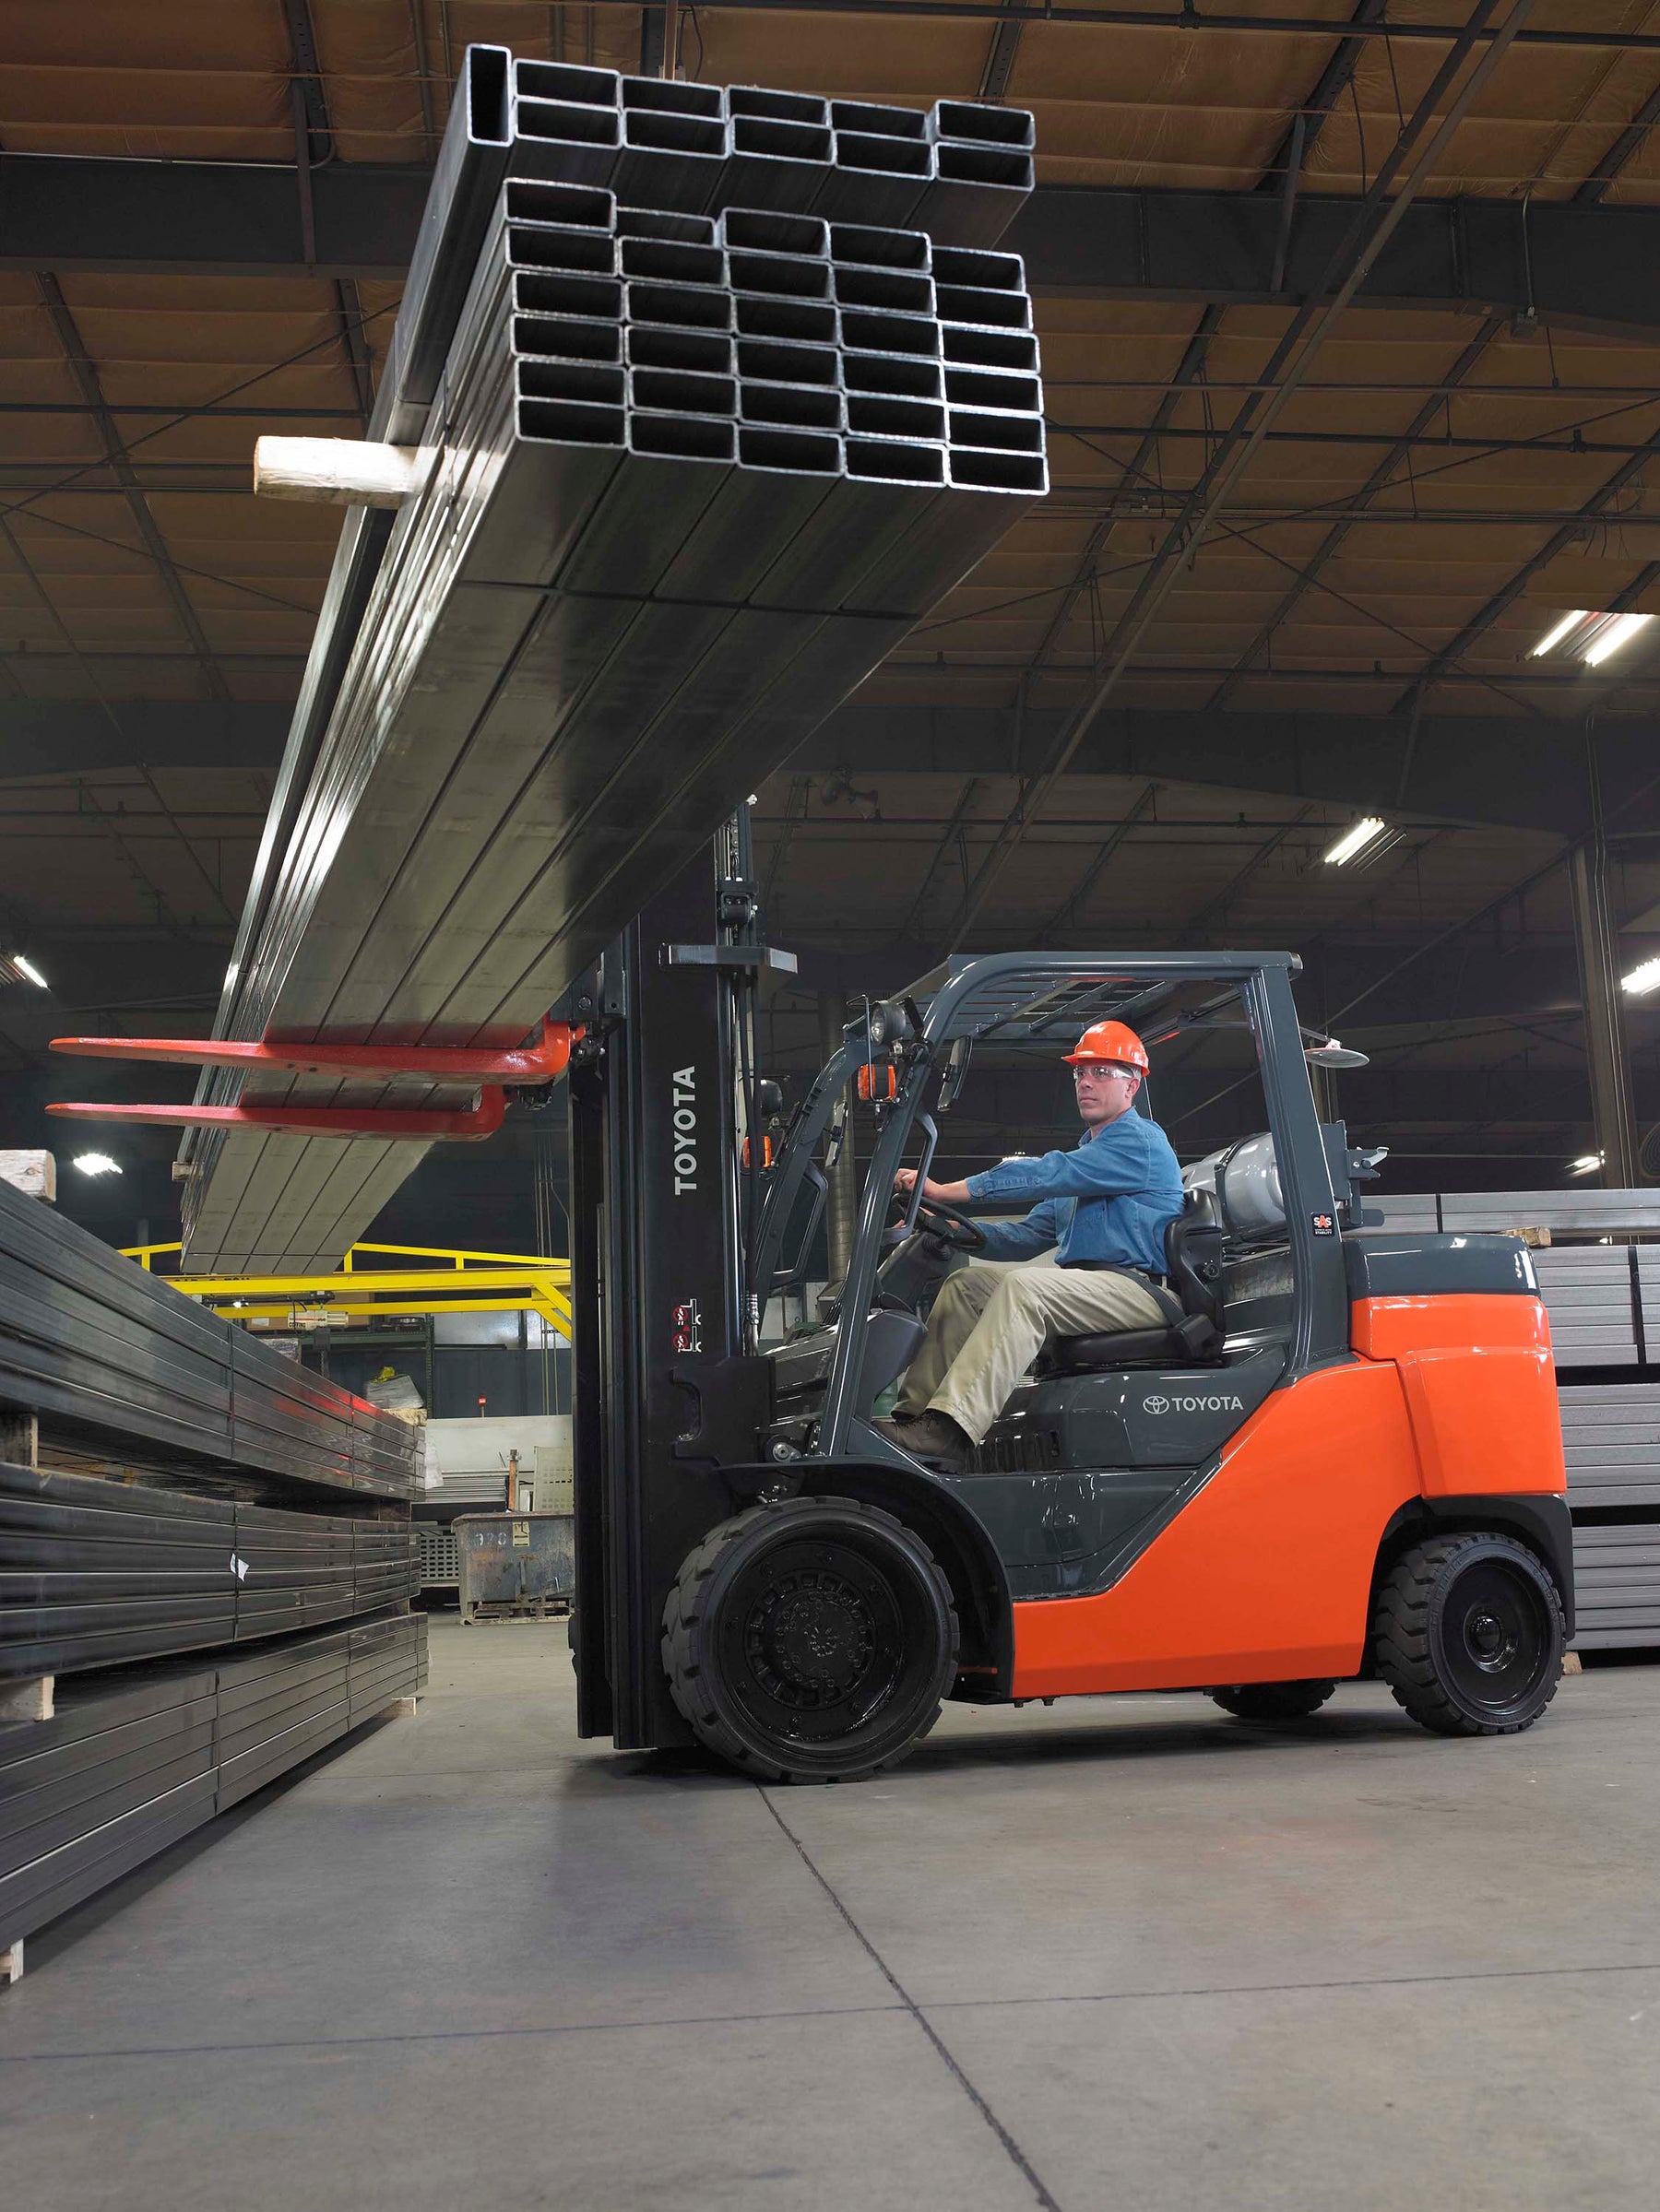 What To Ask When Shopping for a Forklift